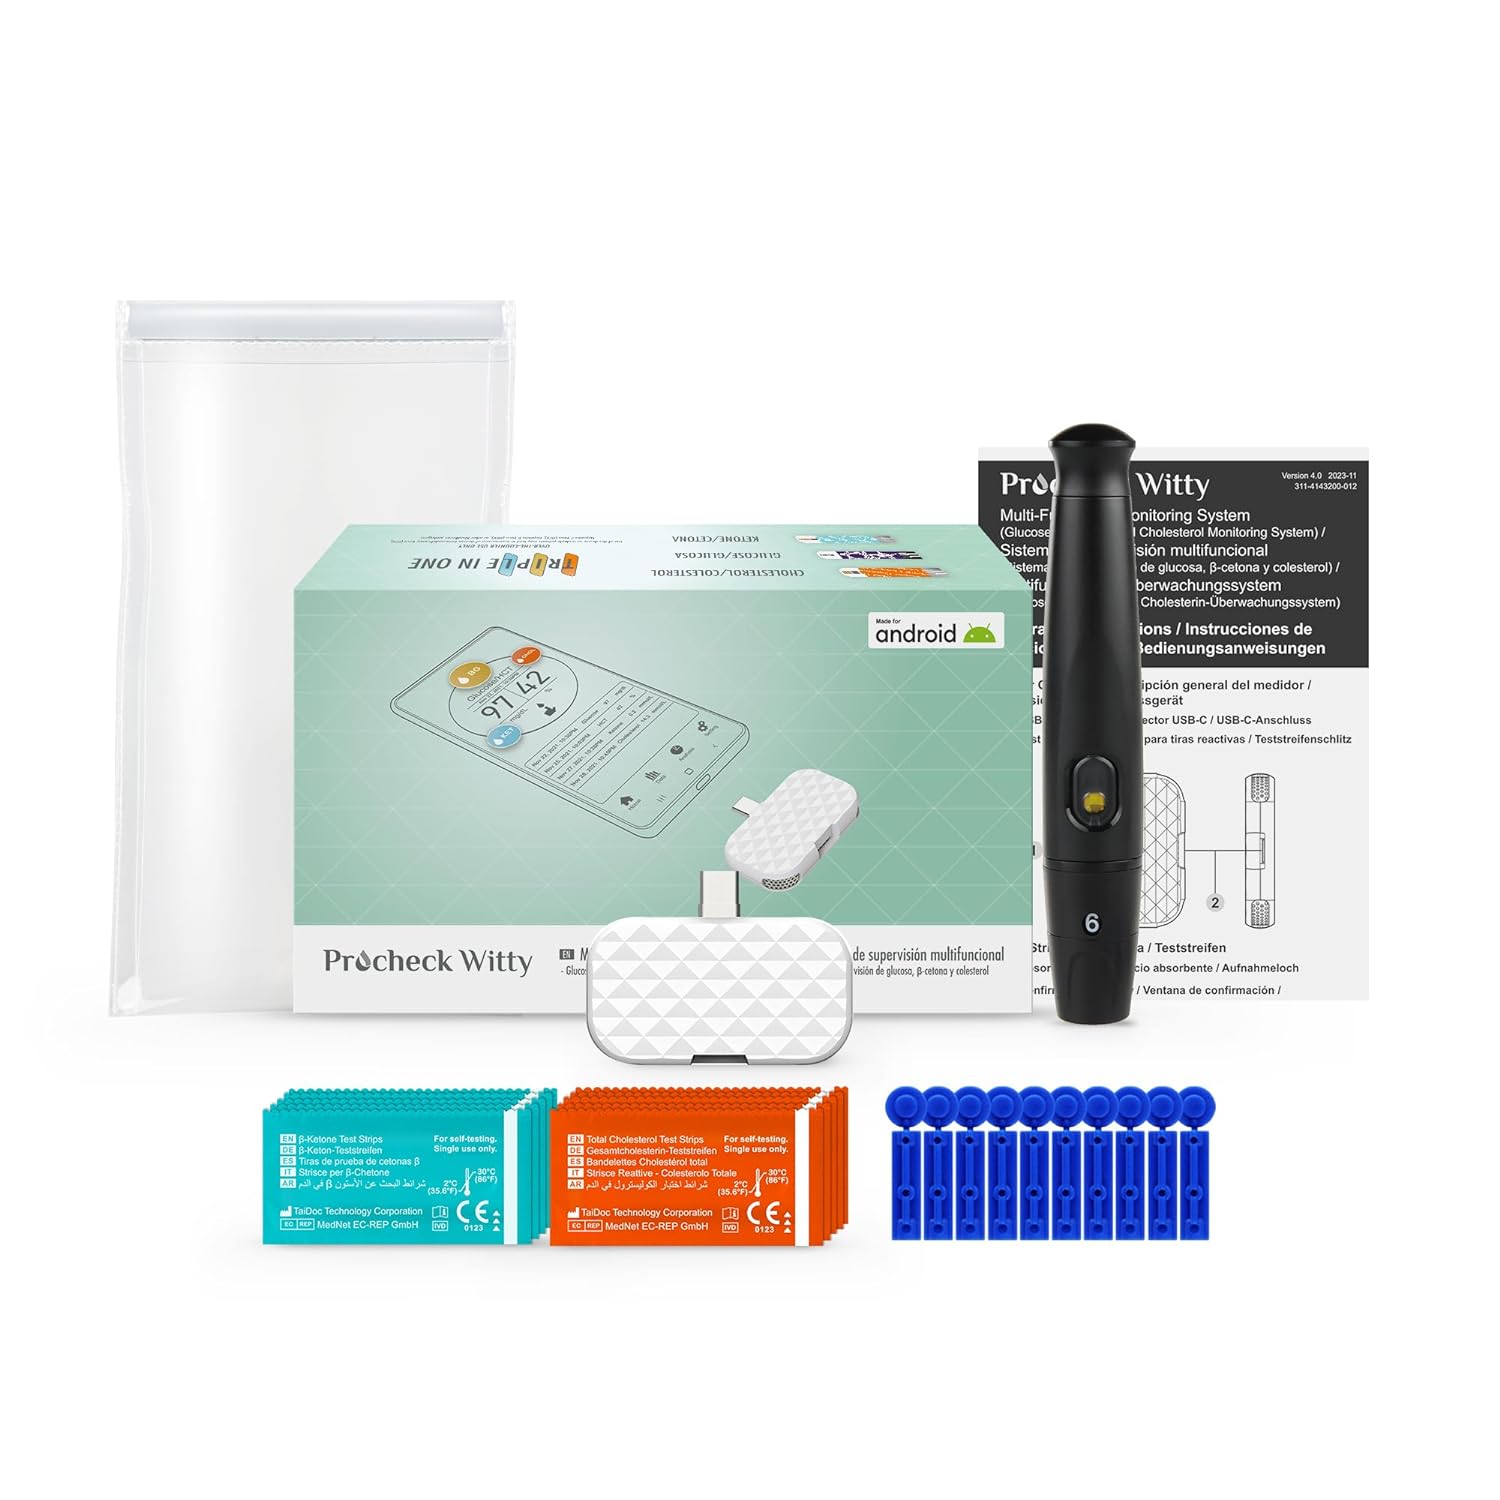 MbH Procheck Smartphone Dongle. Glucose, Cholesterol Testing Kit + Free App. 5pcs Glucose Test Strips, and 5pcs Cholesterol Test Strips, 10pcs Lancets, 1pc Lancing Device Included (for Type-C)